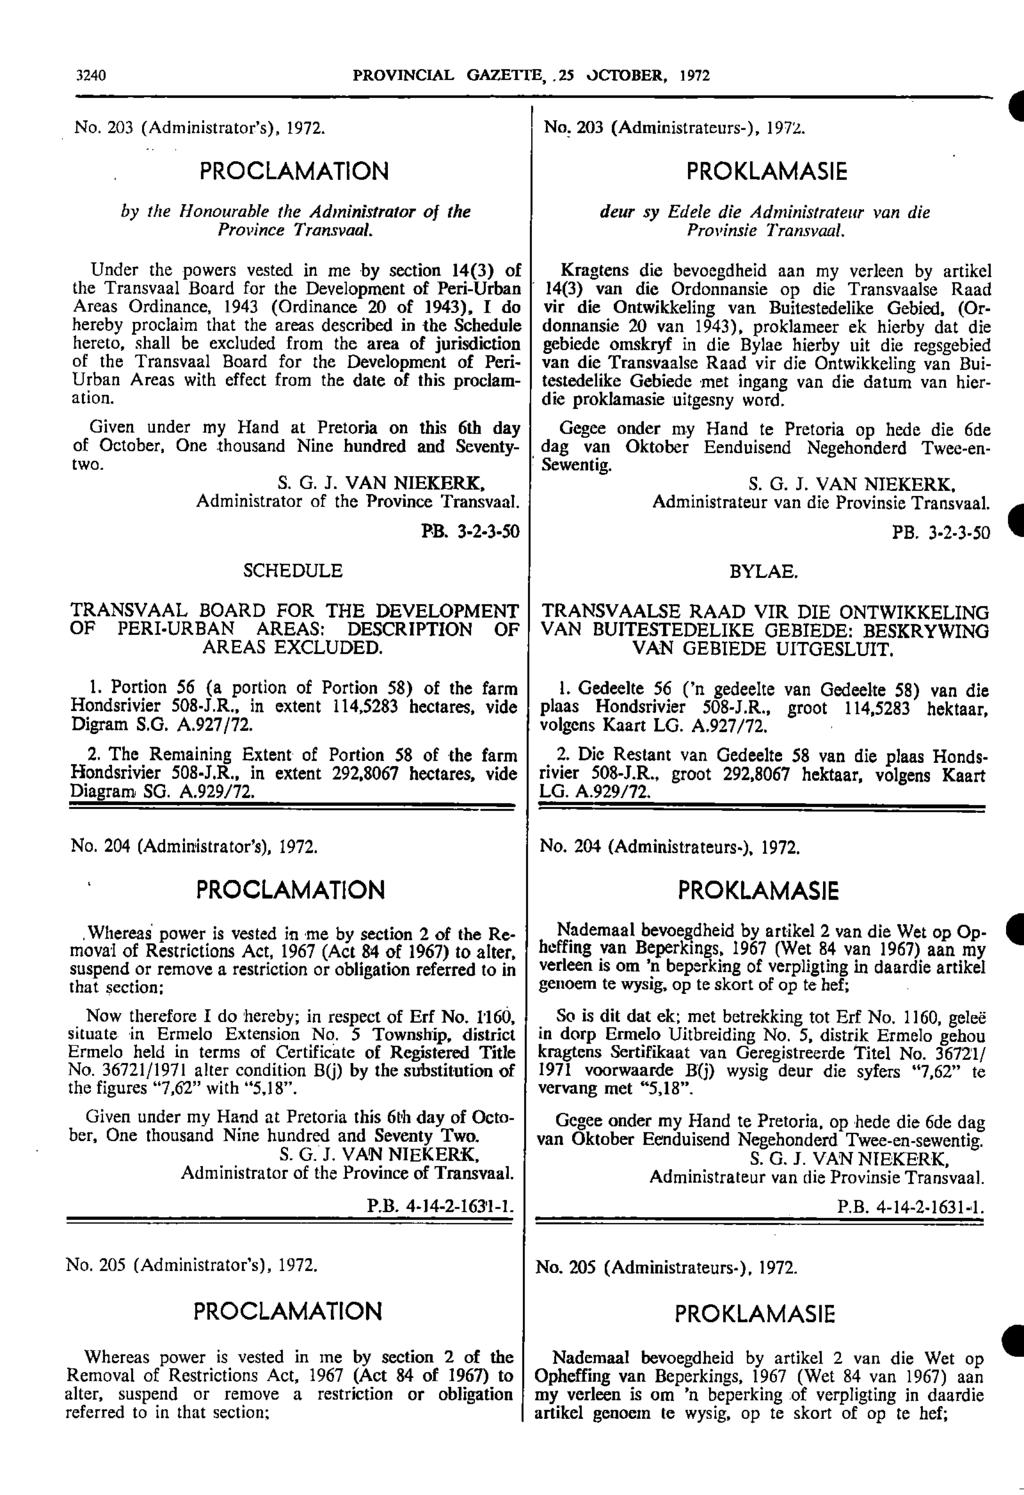 3240 PROVINCIAL GAZETTE,,25 OCTOBER, 1972 No 203 (Administrators), 1972 PROCLAMATION by the Honourable the Administrator of the Province Transvaal I No 203 (Administrateurs), 1972 PROKLAMASIE dew sy